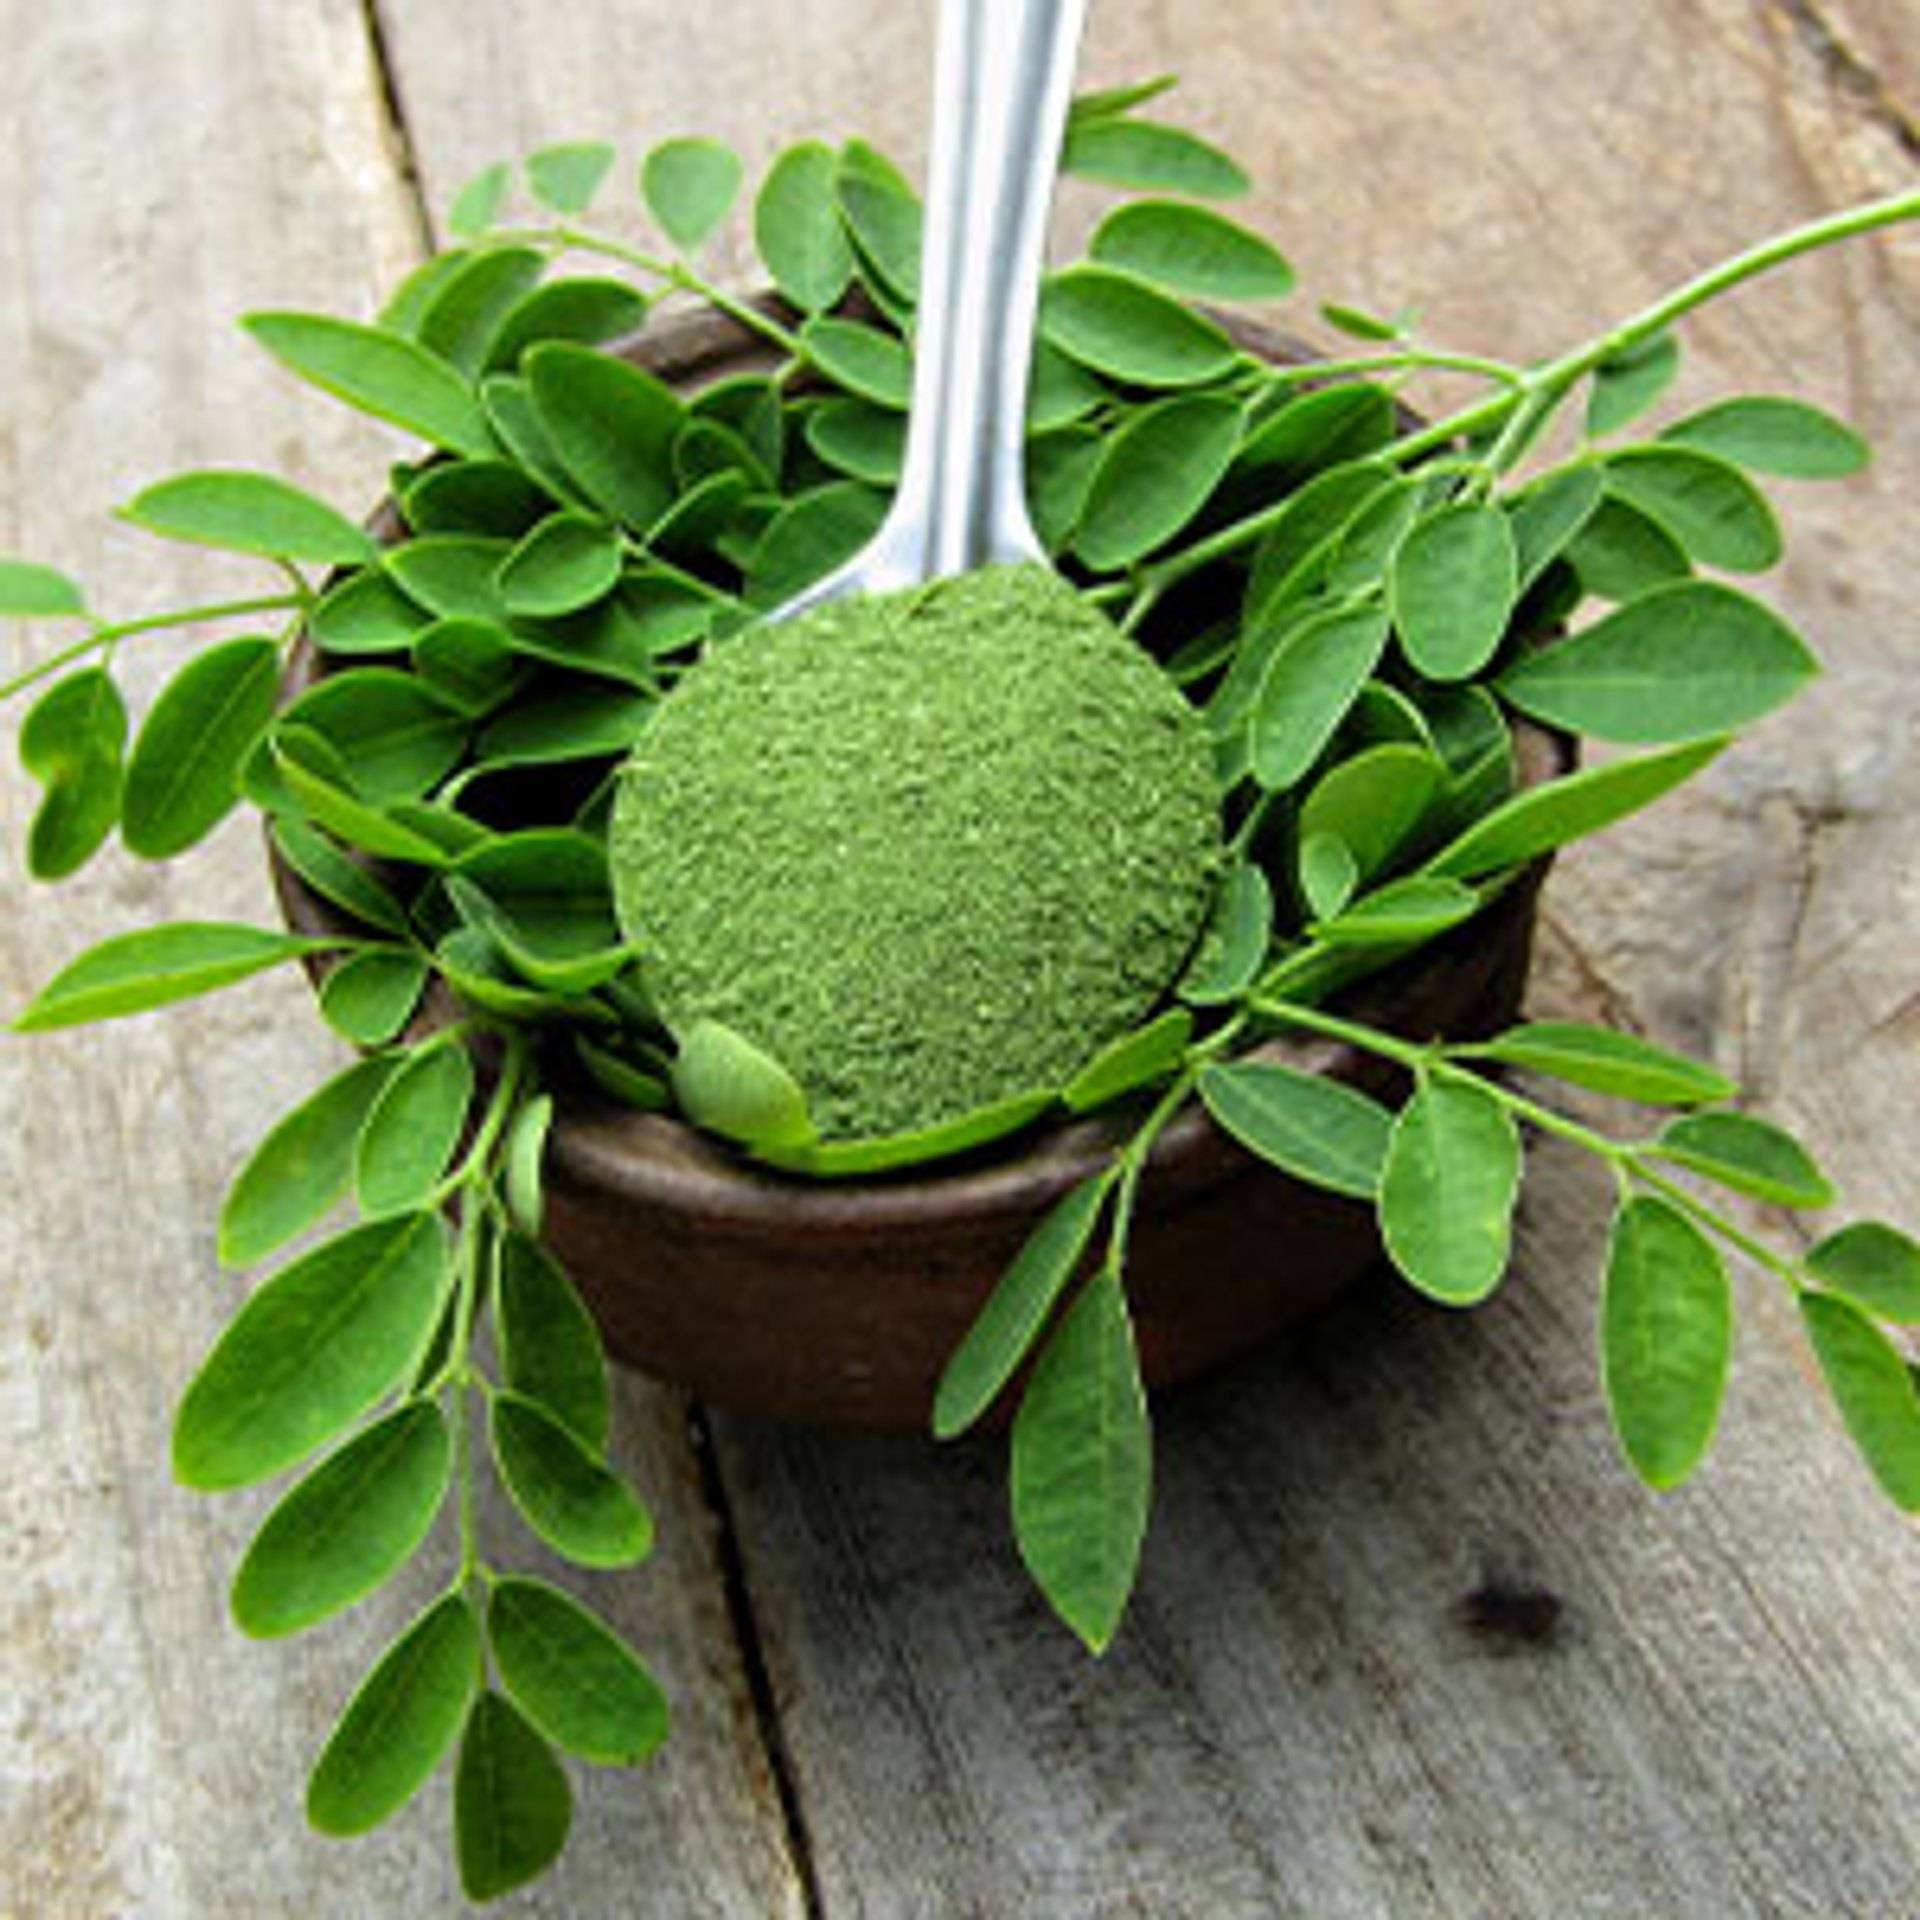 Moringa - From miracle tree to superfood